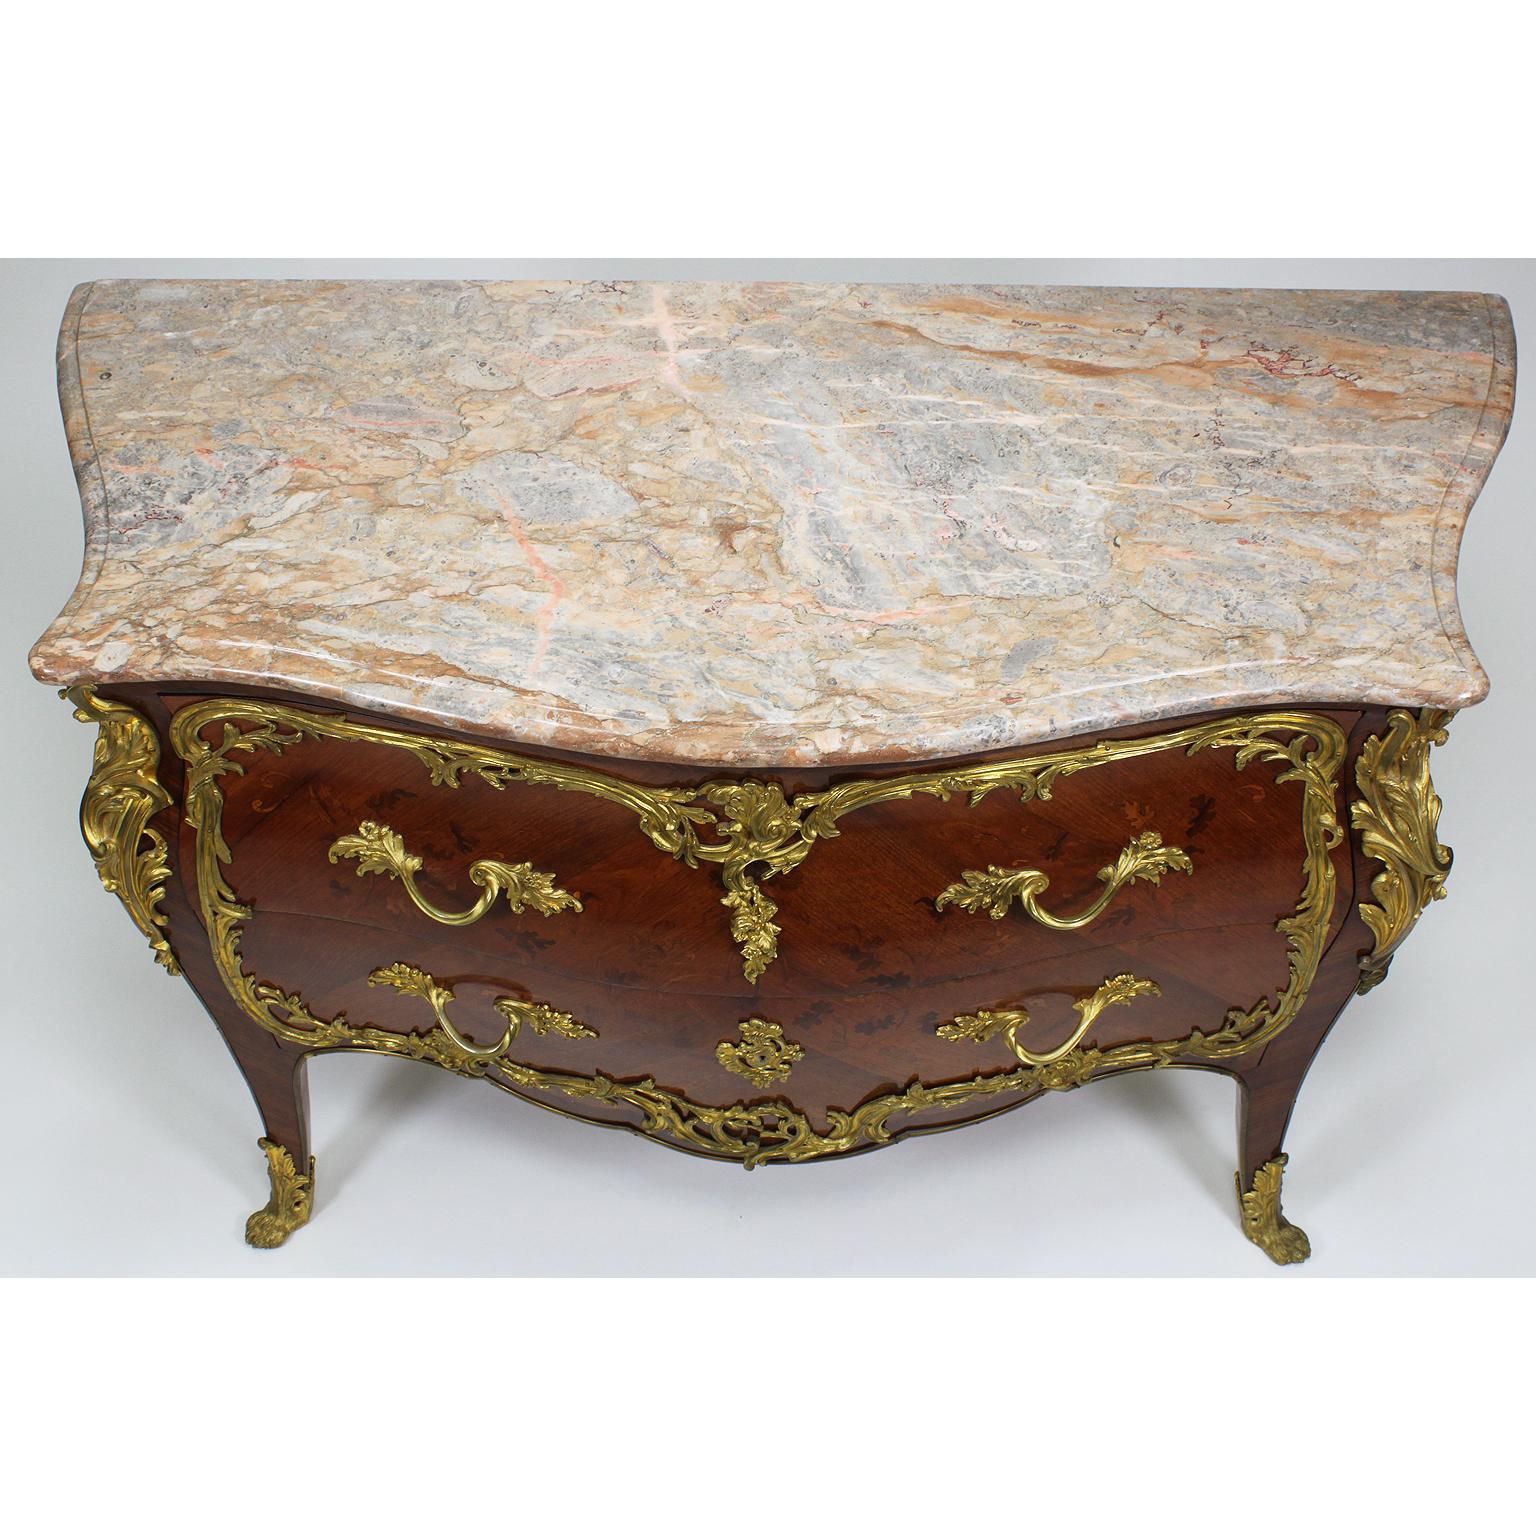 French 19th-20th Century Louis XV Style Gilt-Bronze Mounted Marquetry Commode For Sale 5